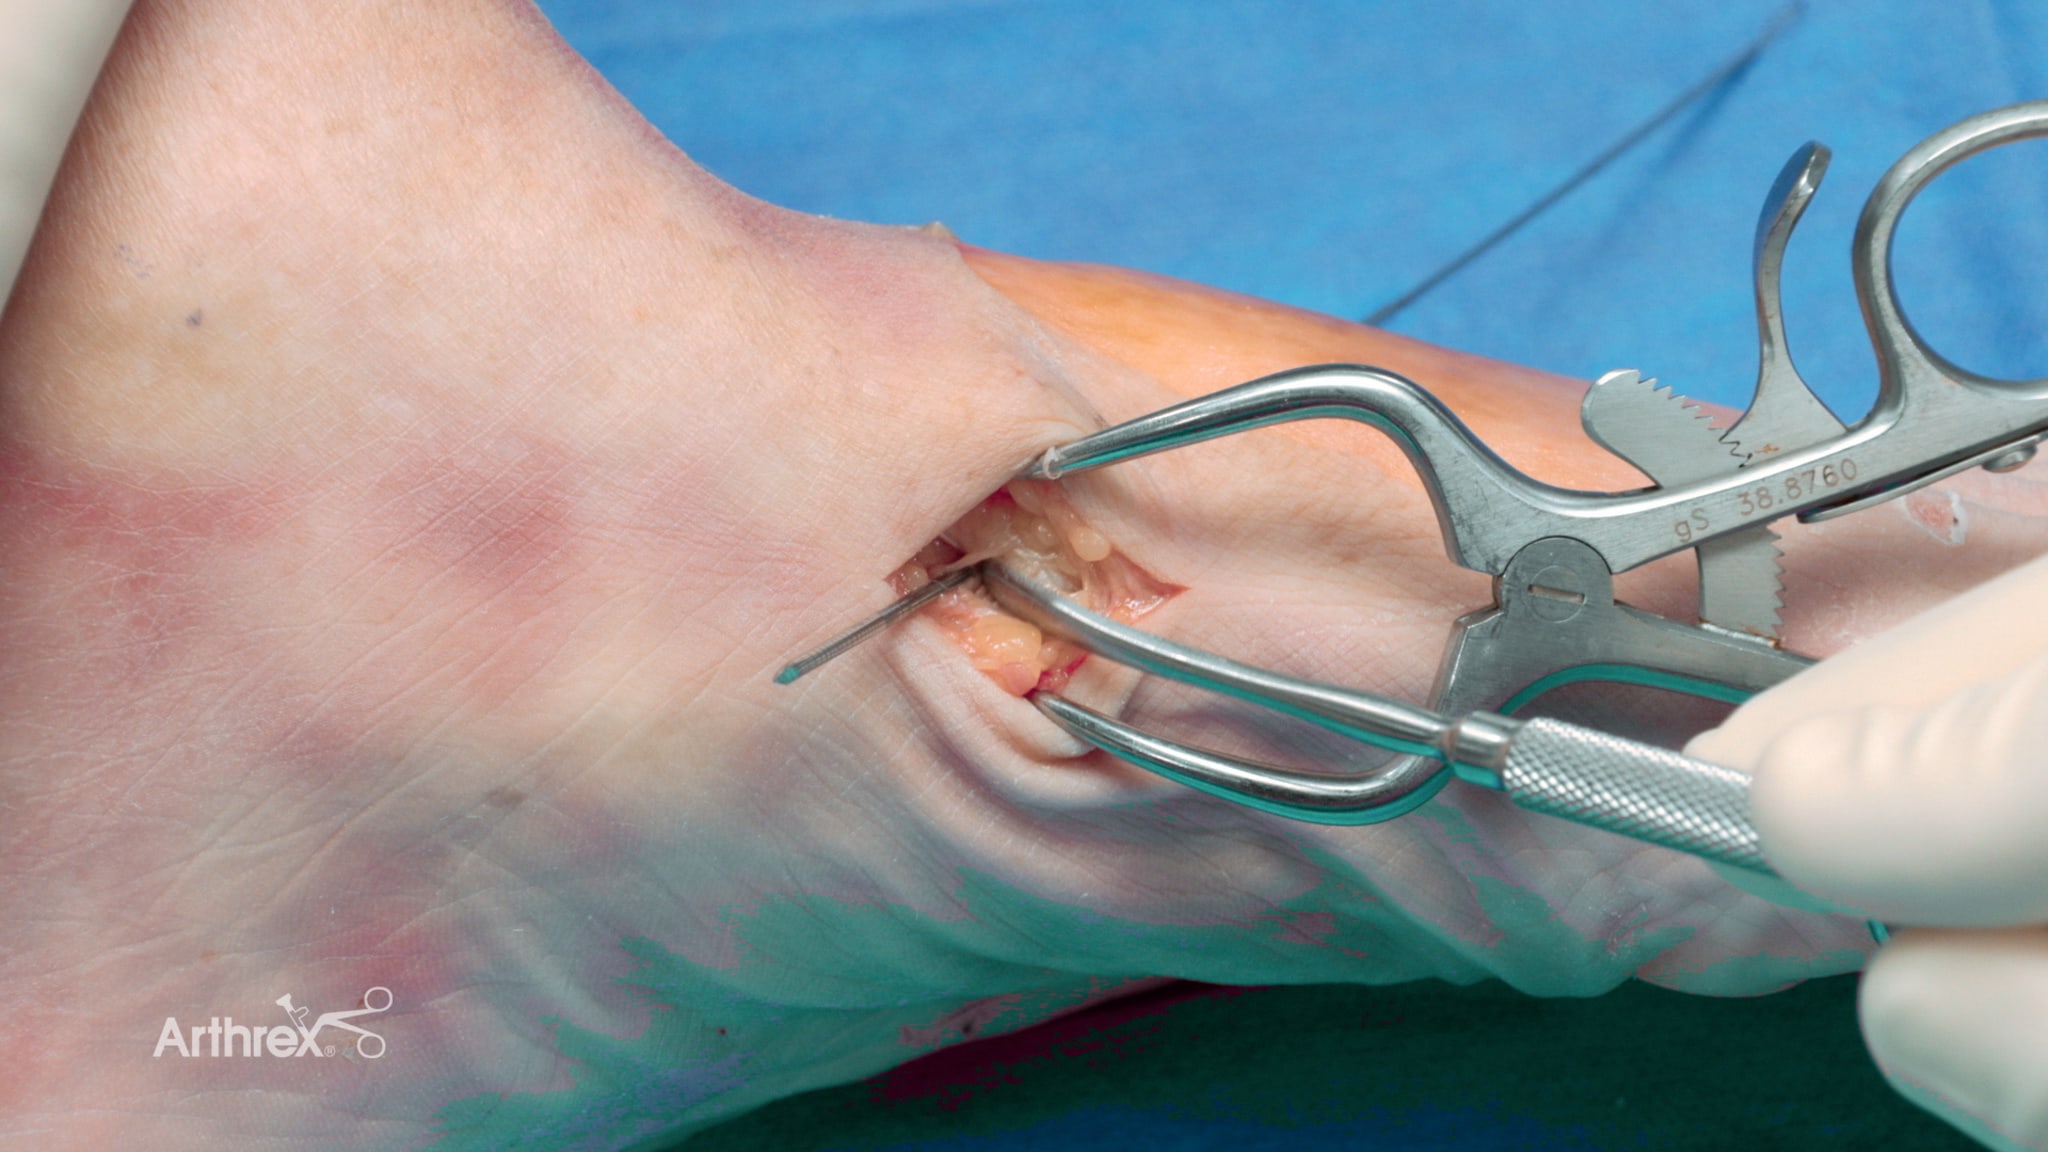 Flexible Fixation Solutions for Treating Lisfranc Injuries